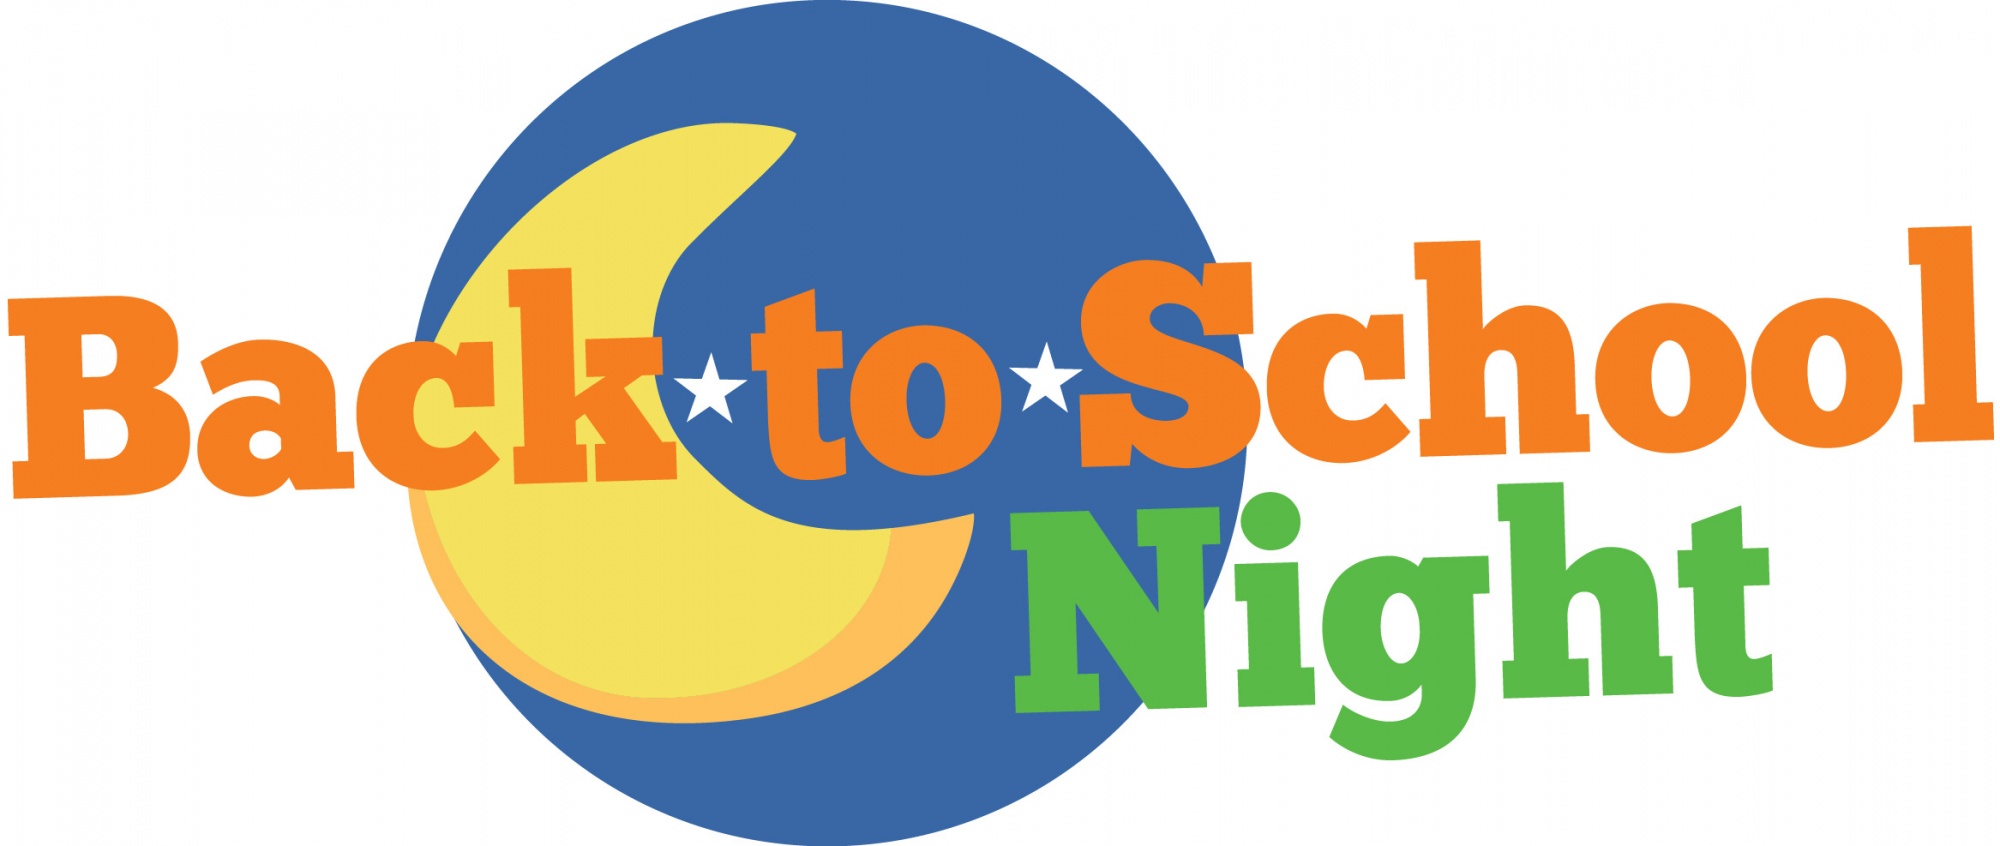 free clipart back to school night - photo #4